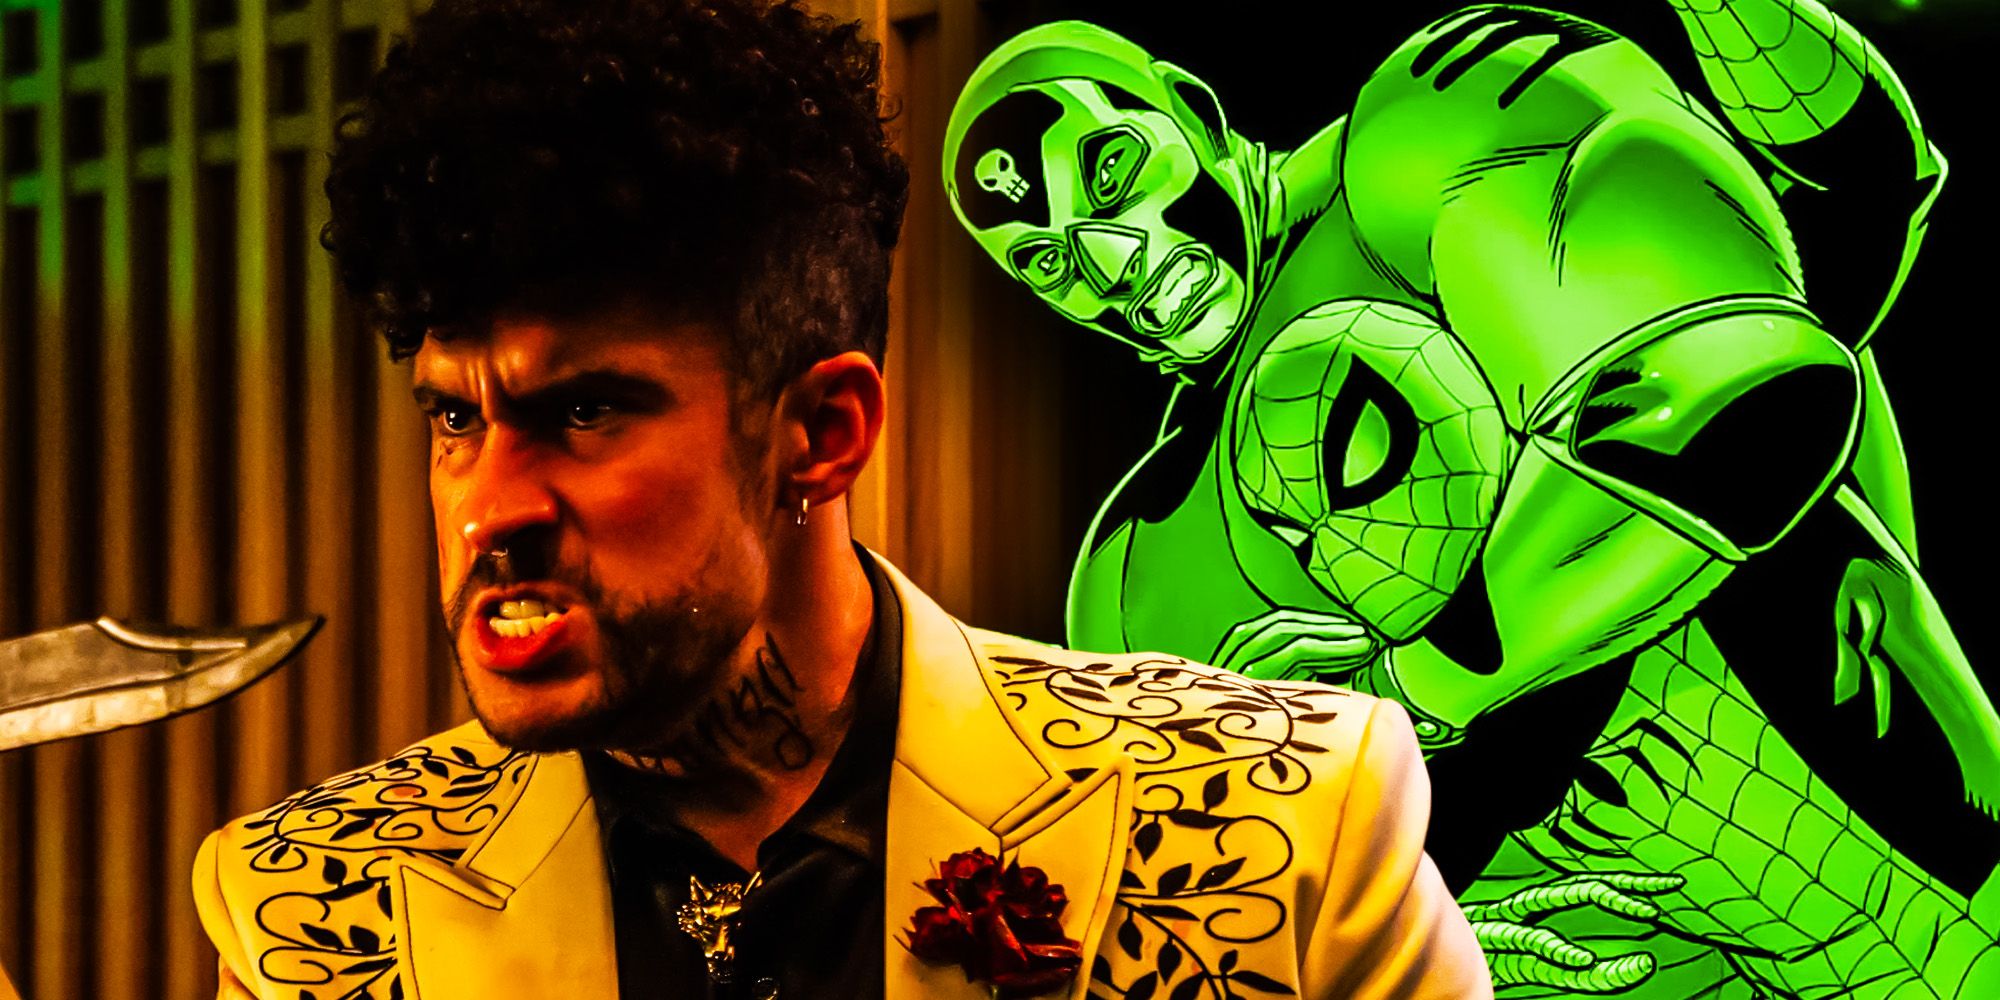 Custom image of Bad Bunny in Bullet Train side by side with El Muerto choking Spider-Man in the comics.